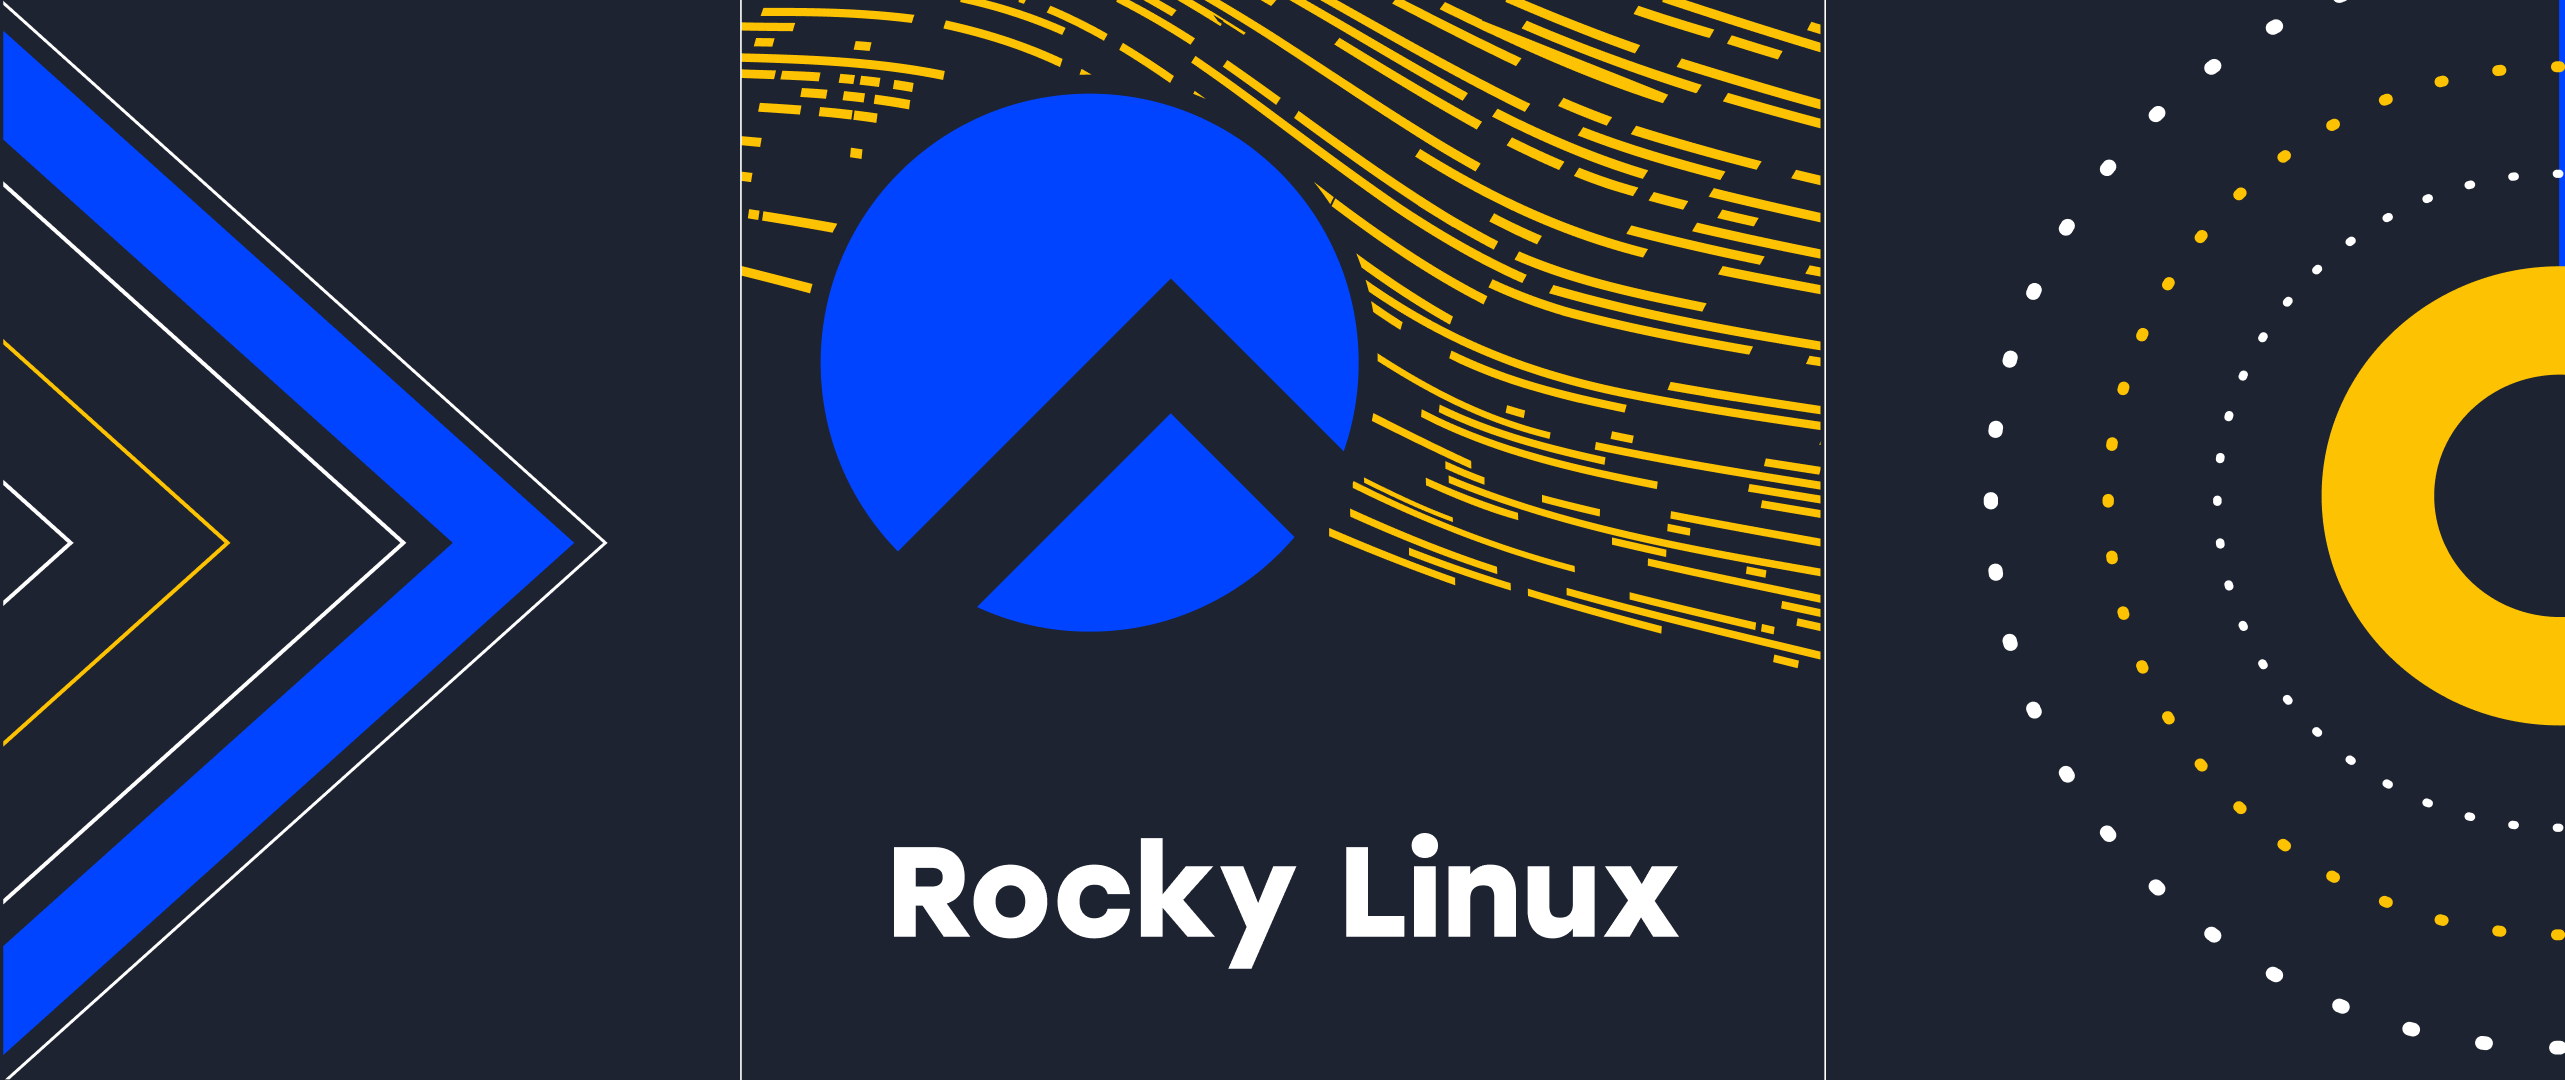 Serverspace has added a new Rocky Linux OS